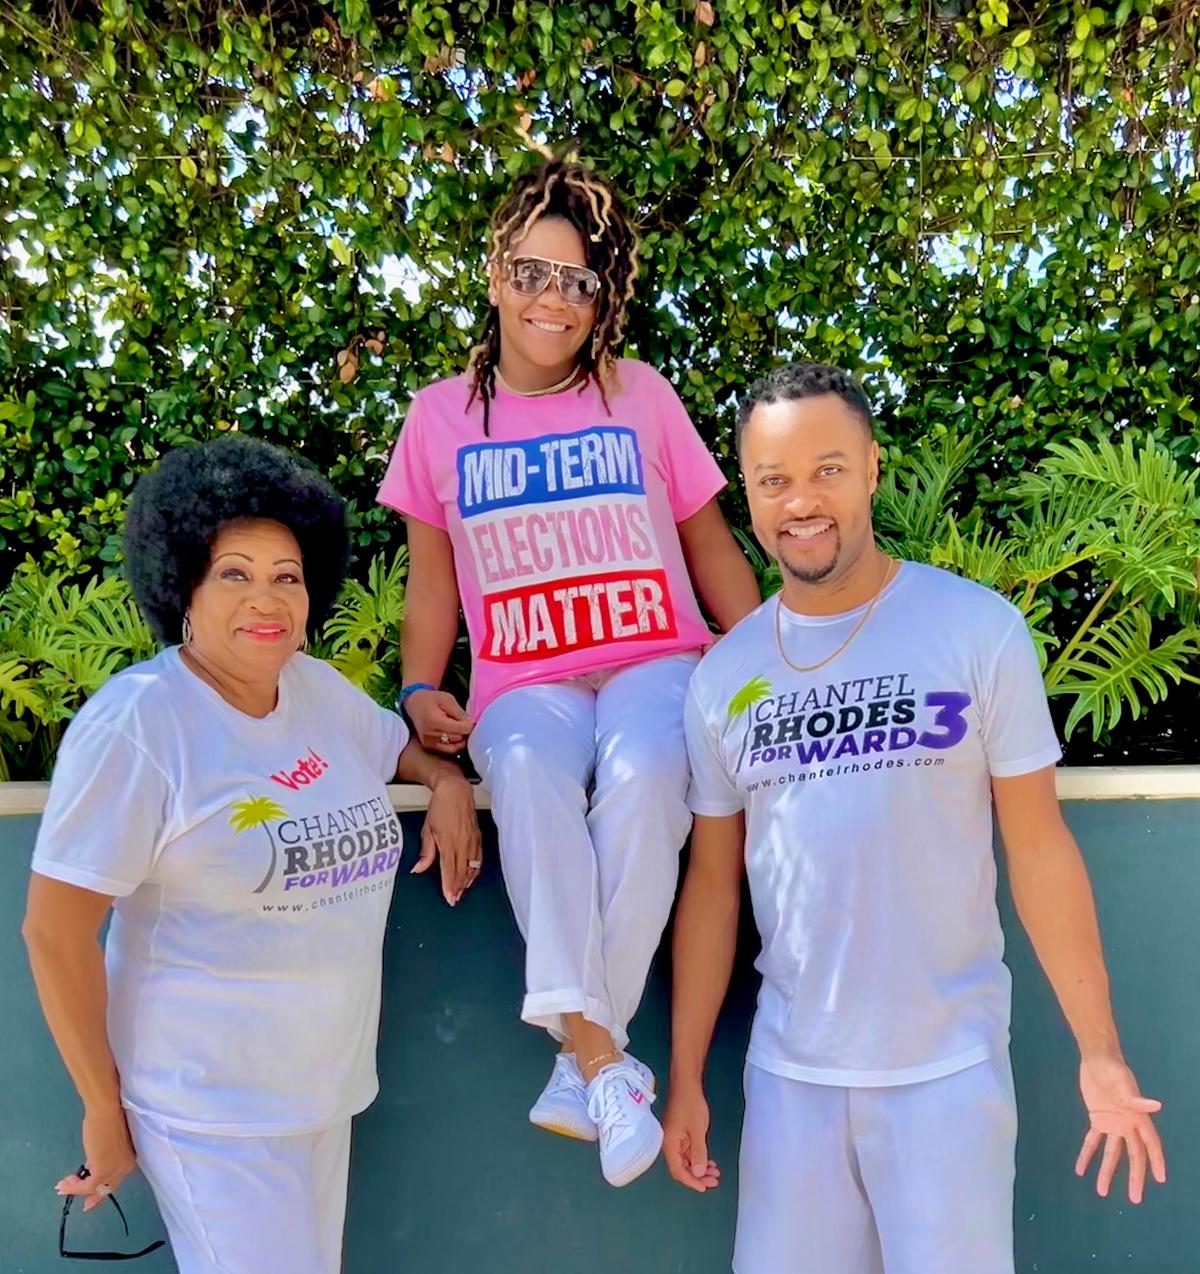 Chantel Rhodes (center), candidate for Ft. Myers City Council District 3 with her mother Darlene (left) and bother Chuck (right). (Courtesy of Chantel Rhodes)